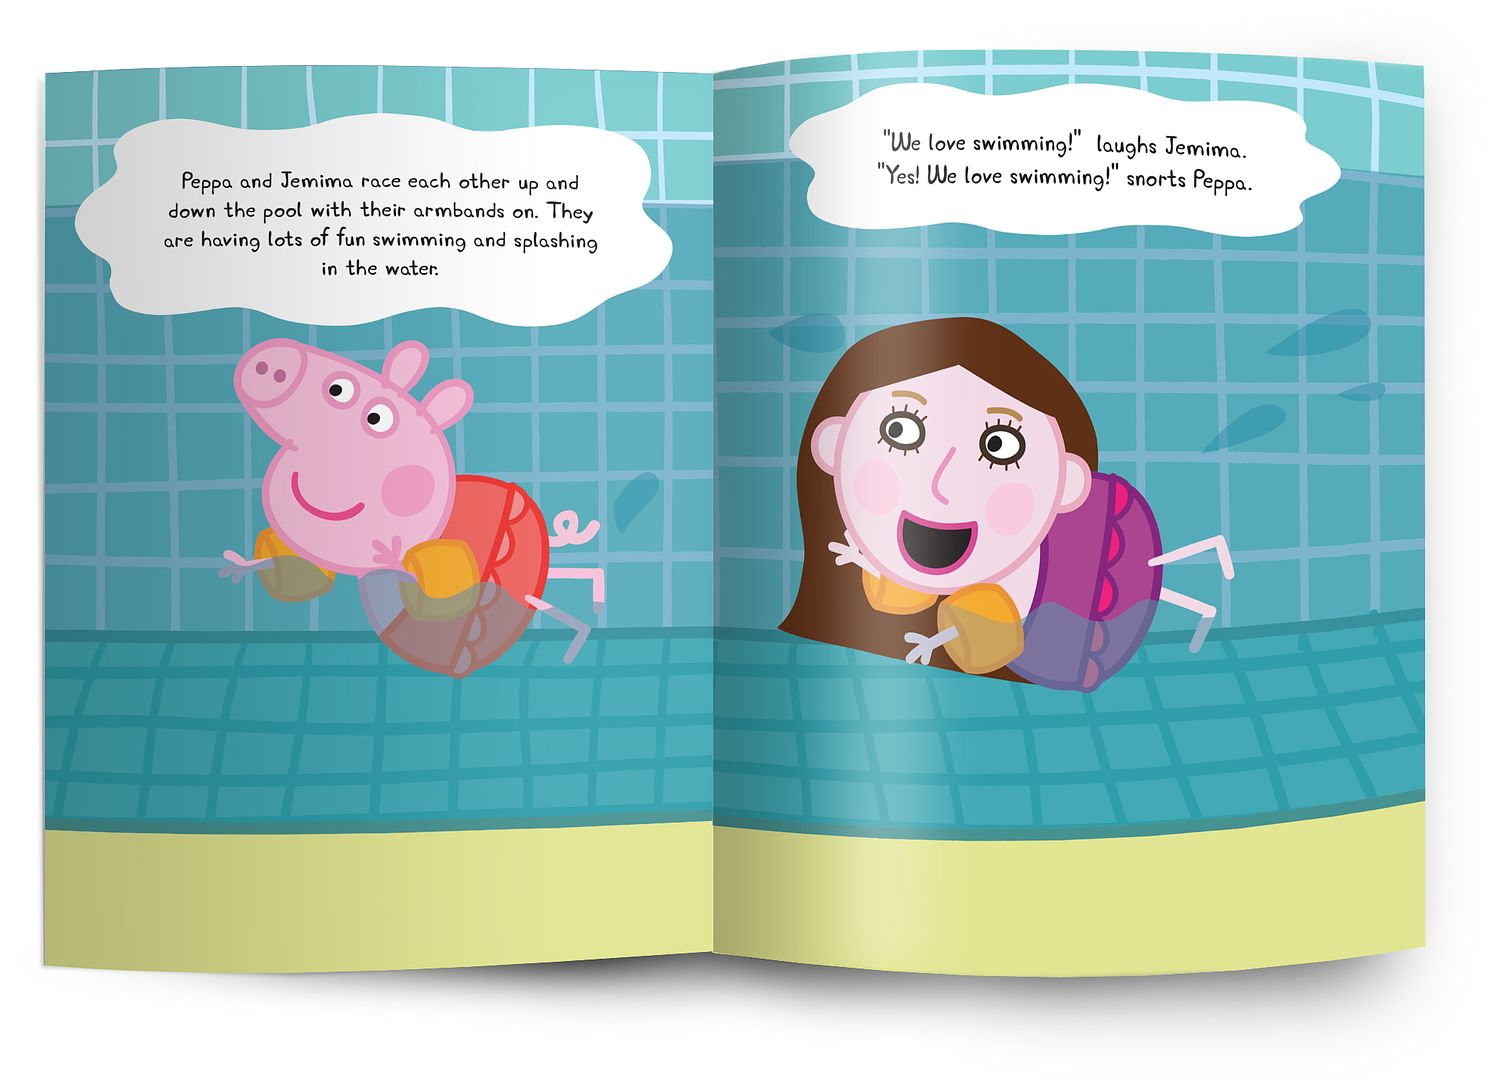 Personalized Peppa Pig book starring your child